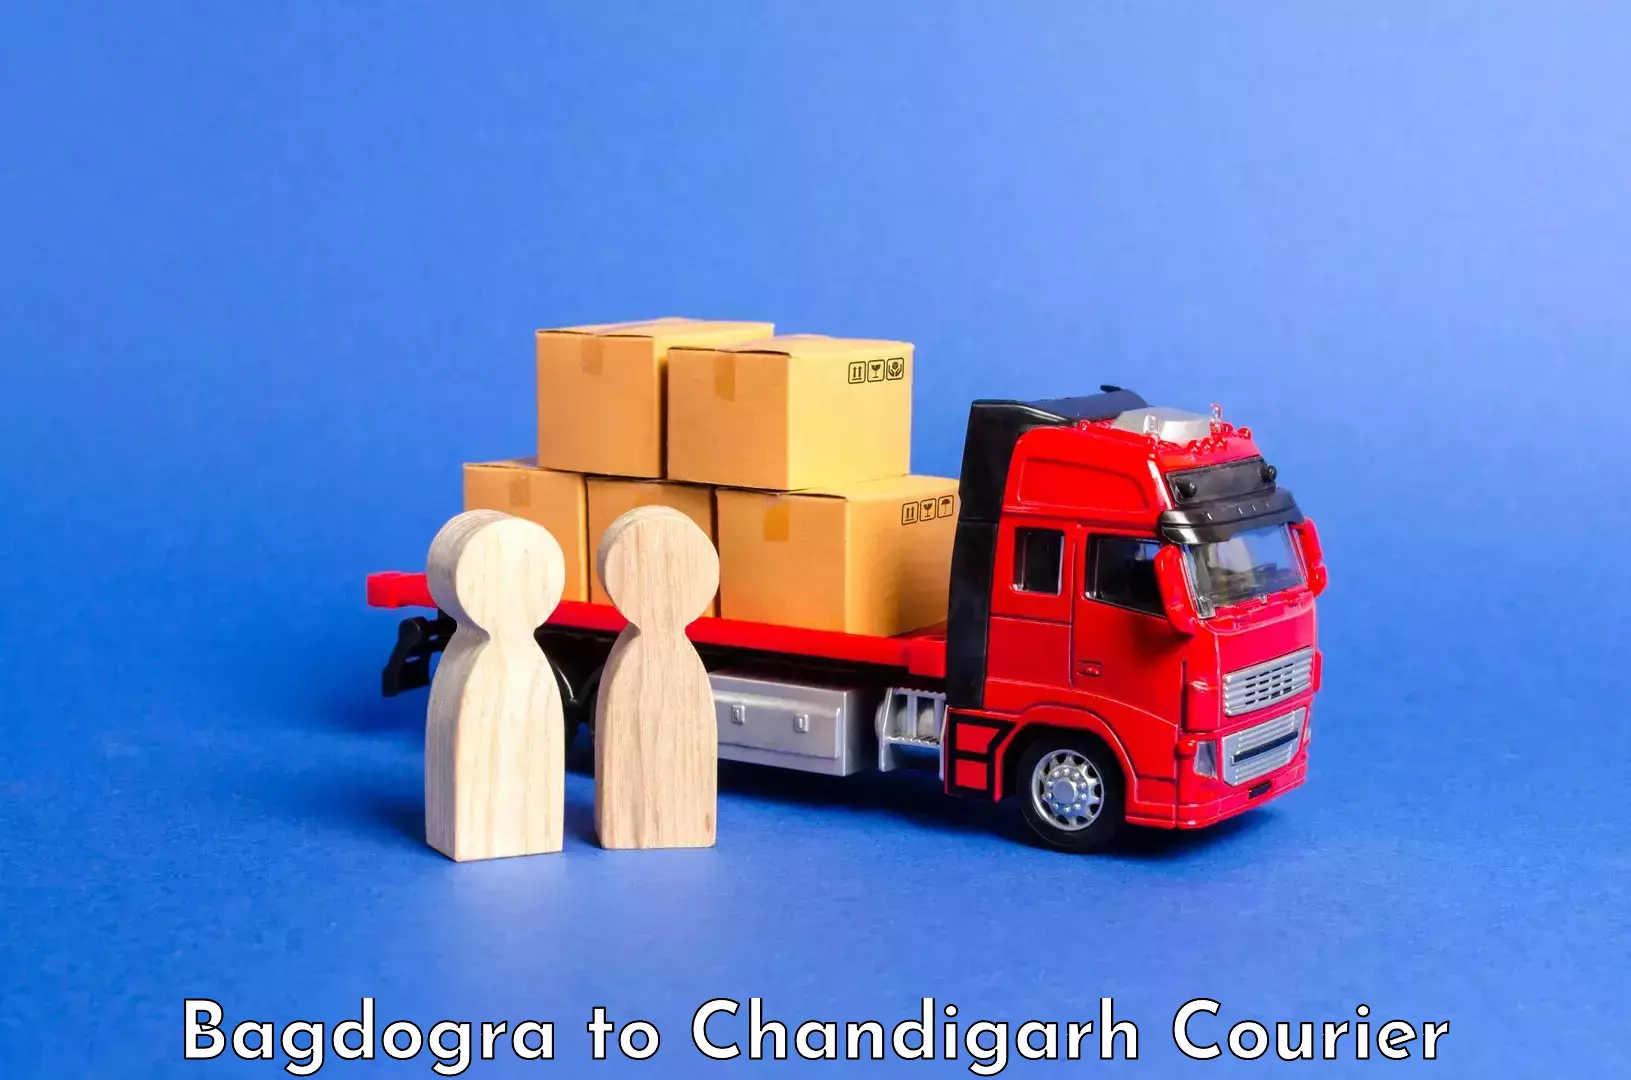 Luggage delivery system Bagdogra to Chandigarh